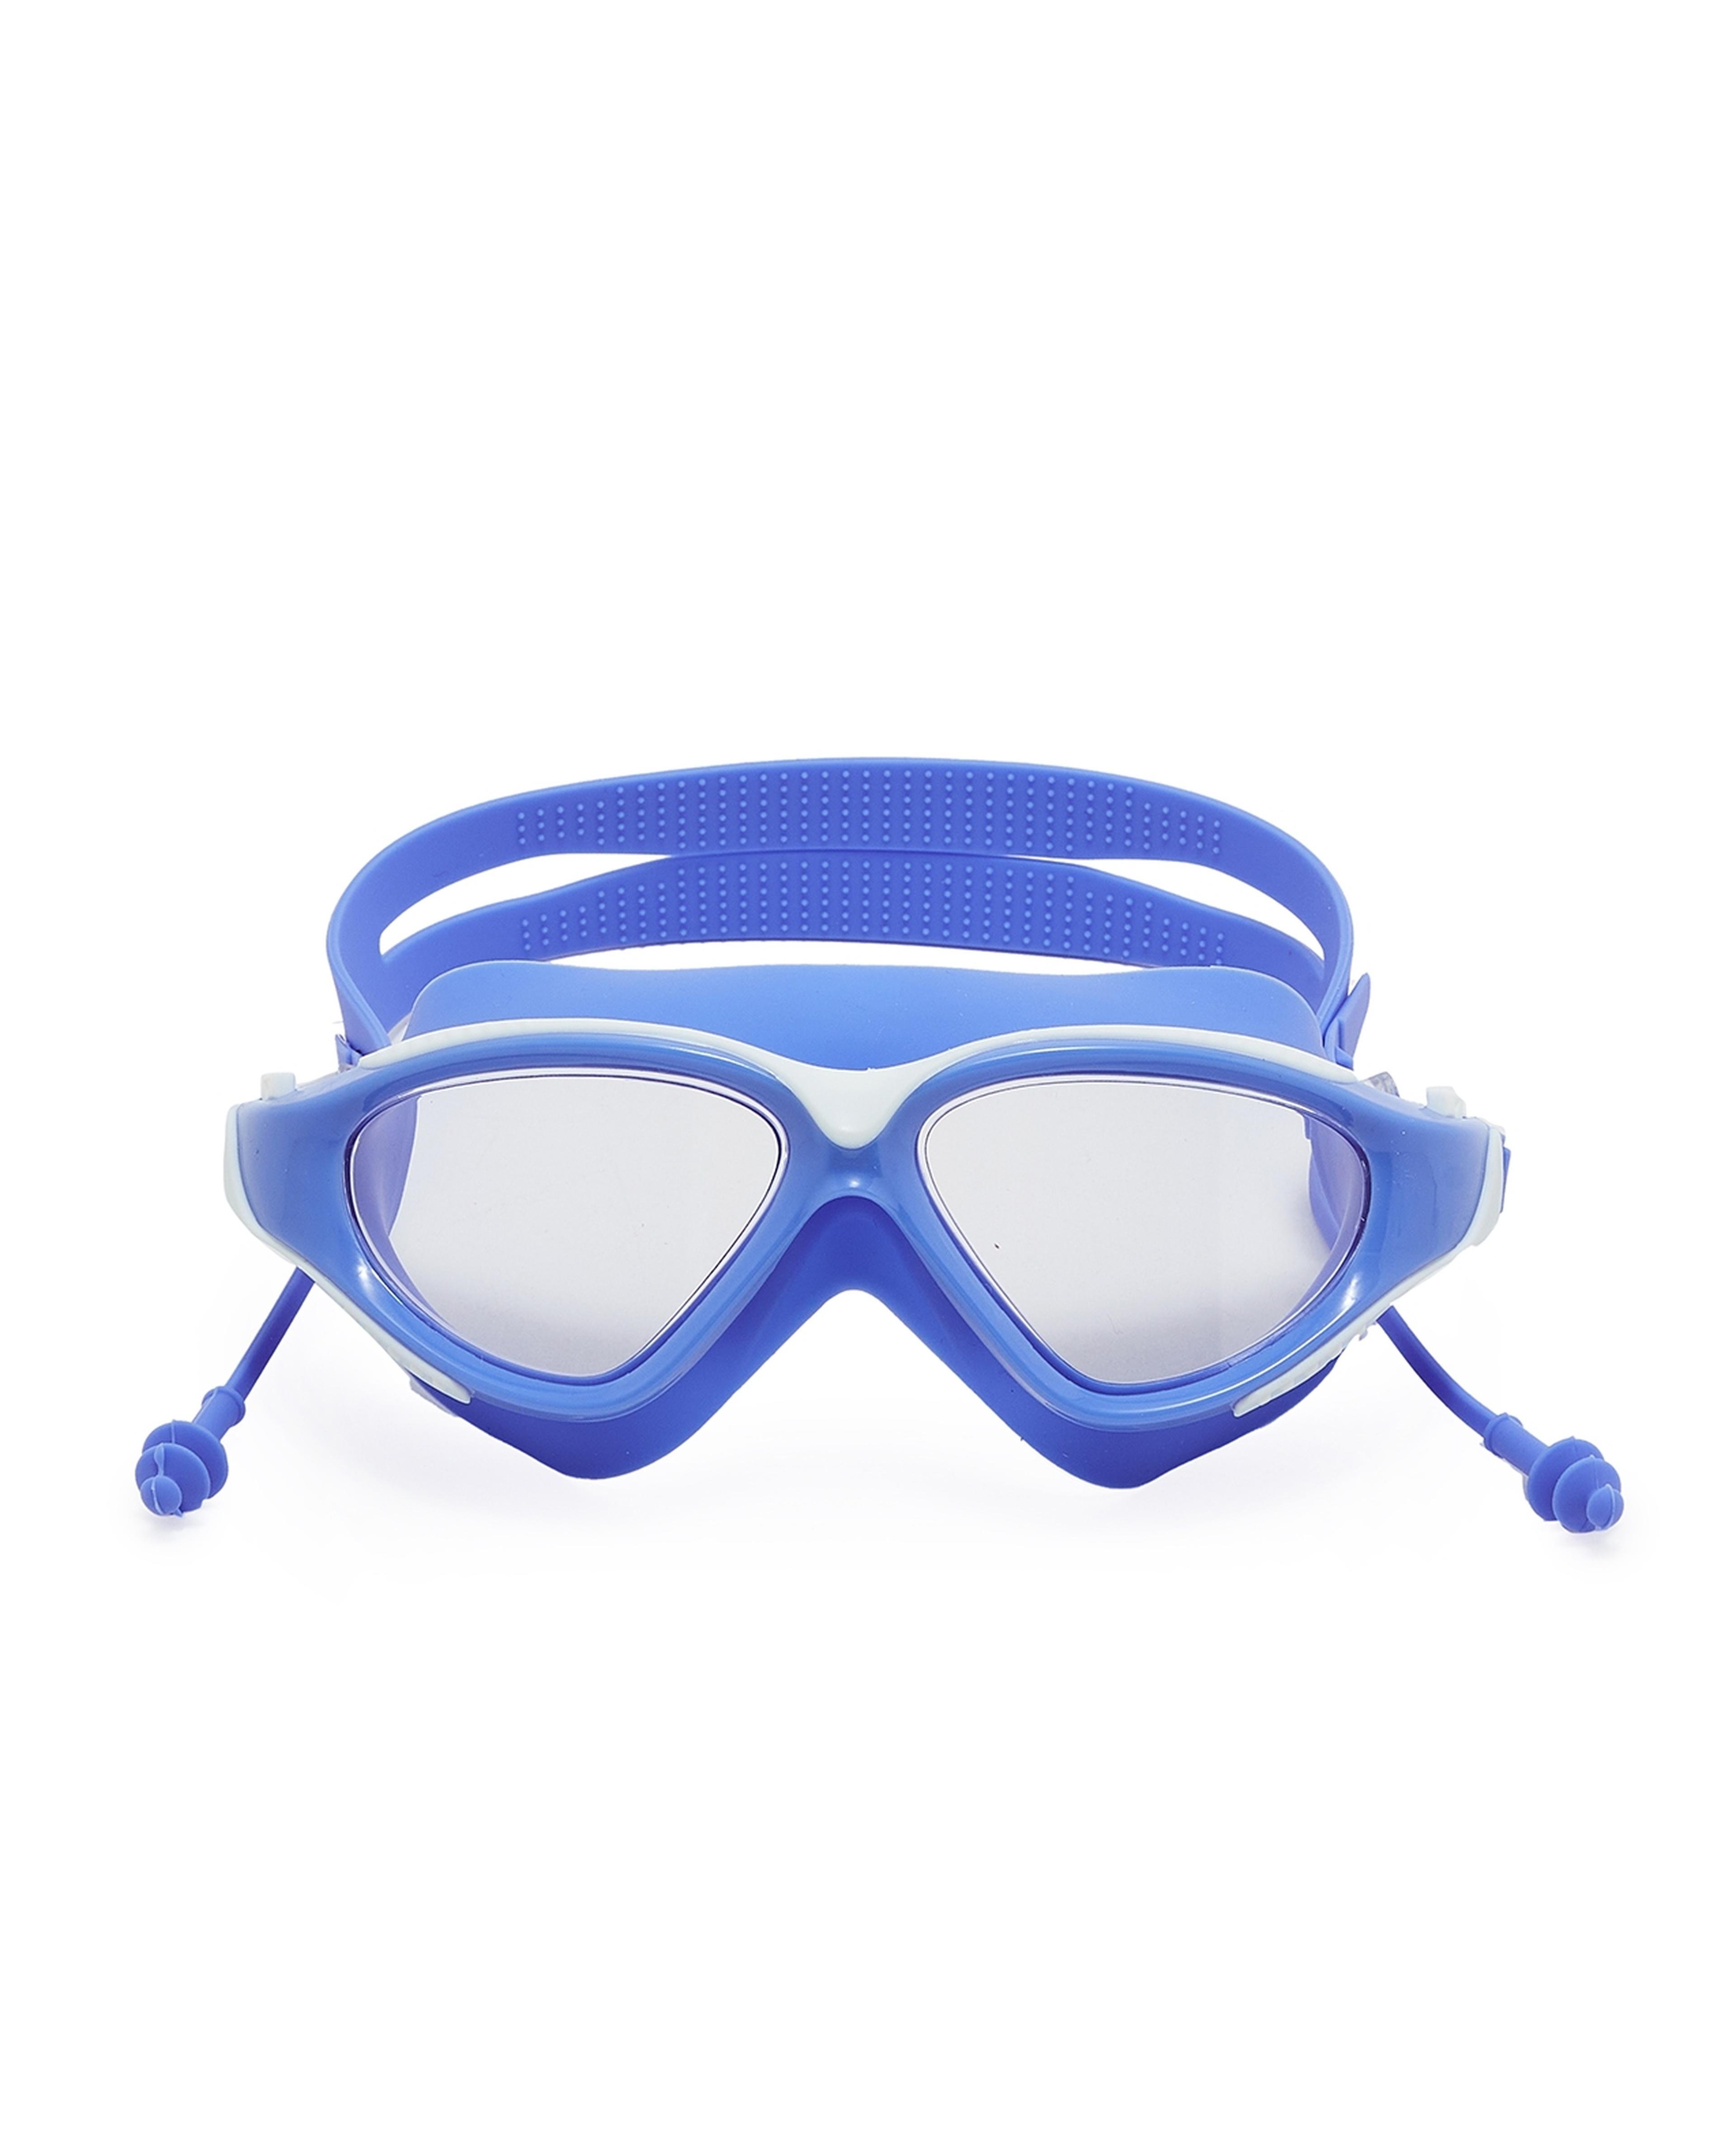 Clear Swimming Goggles